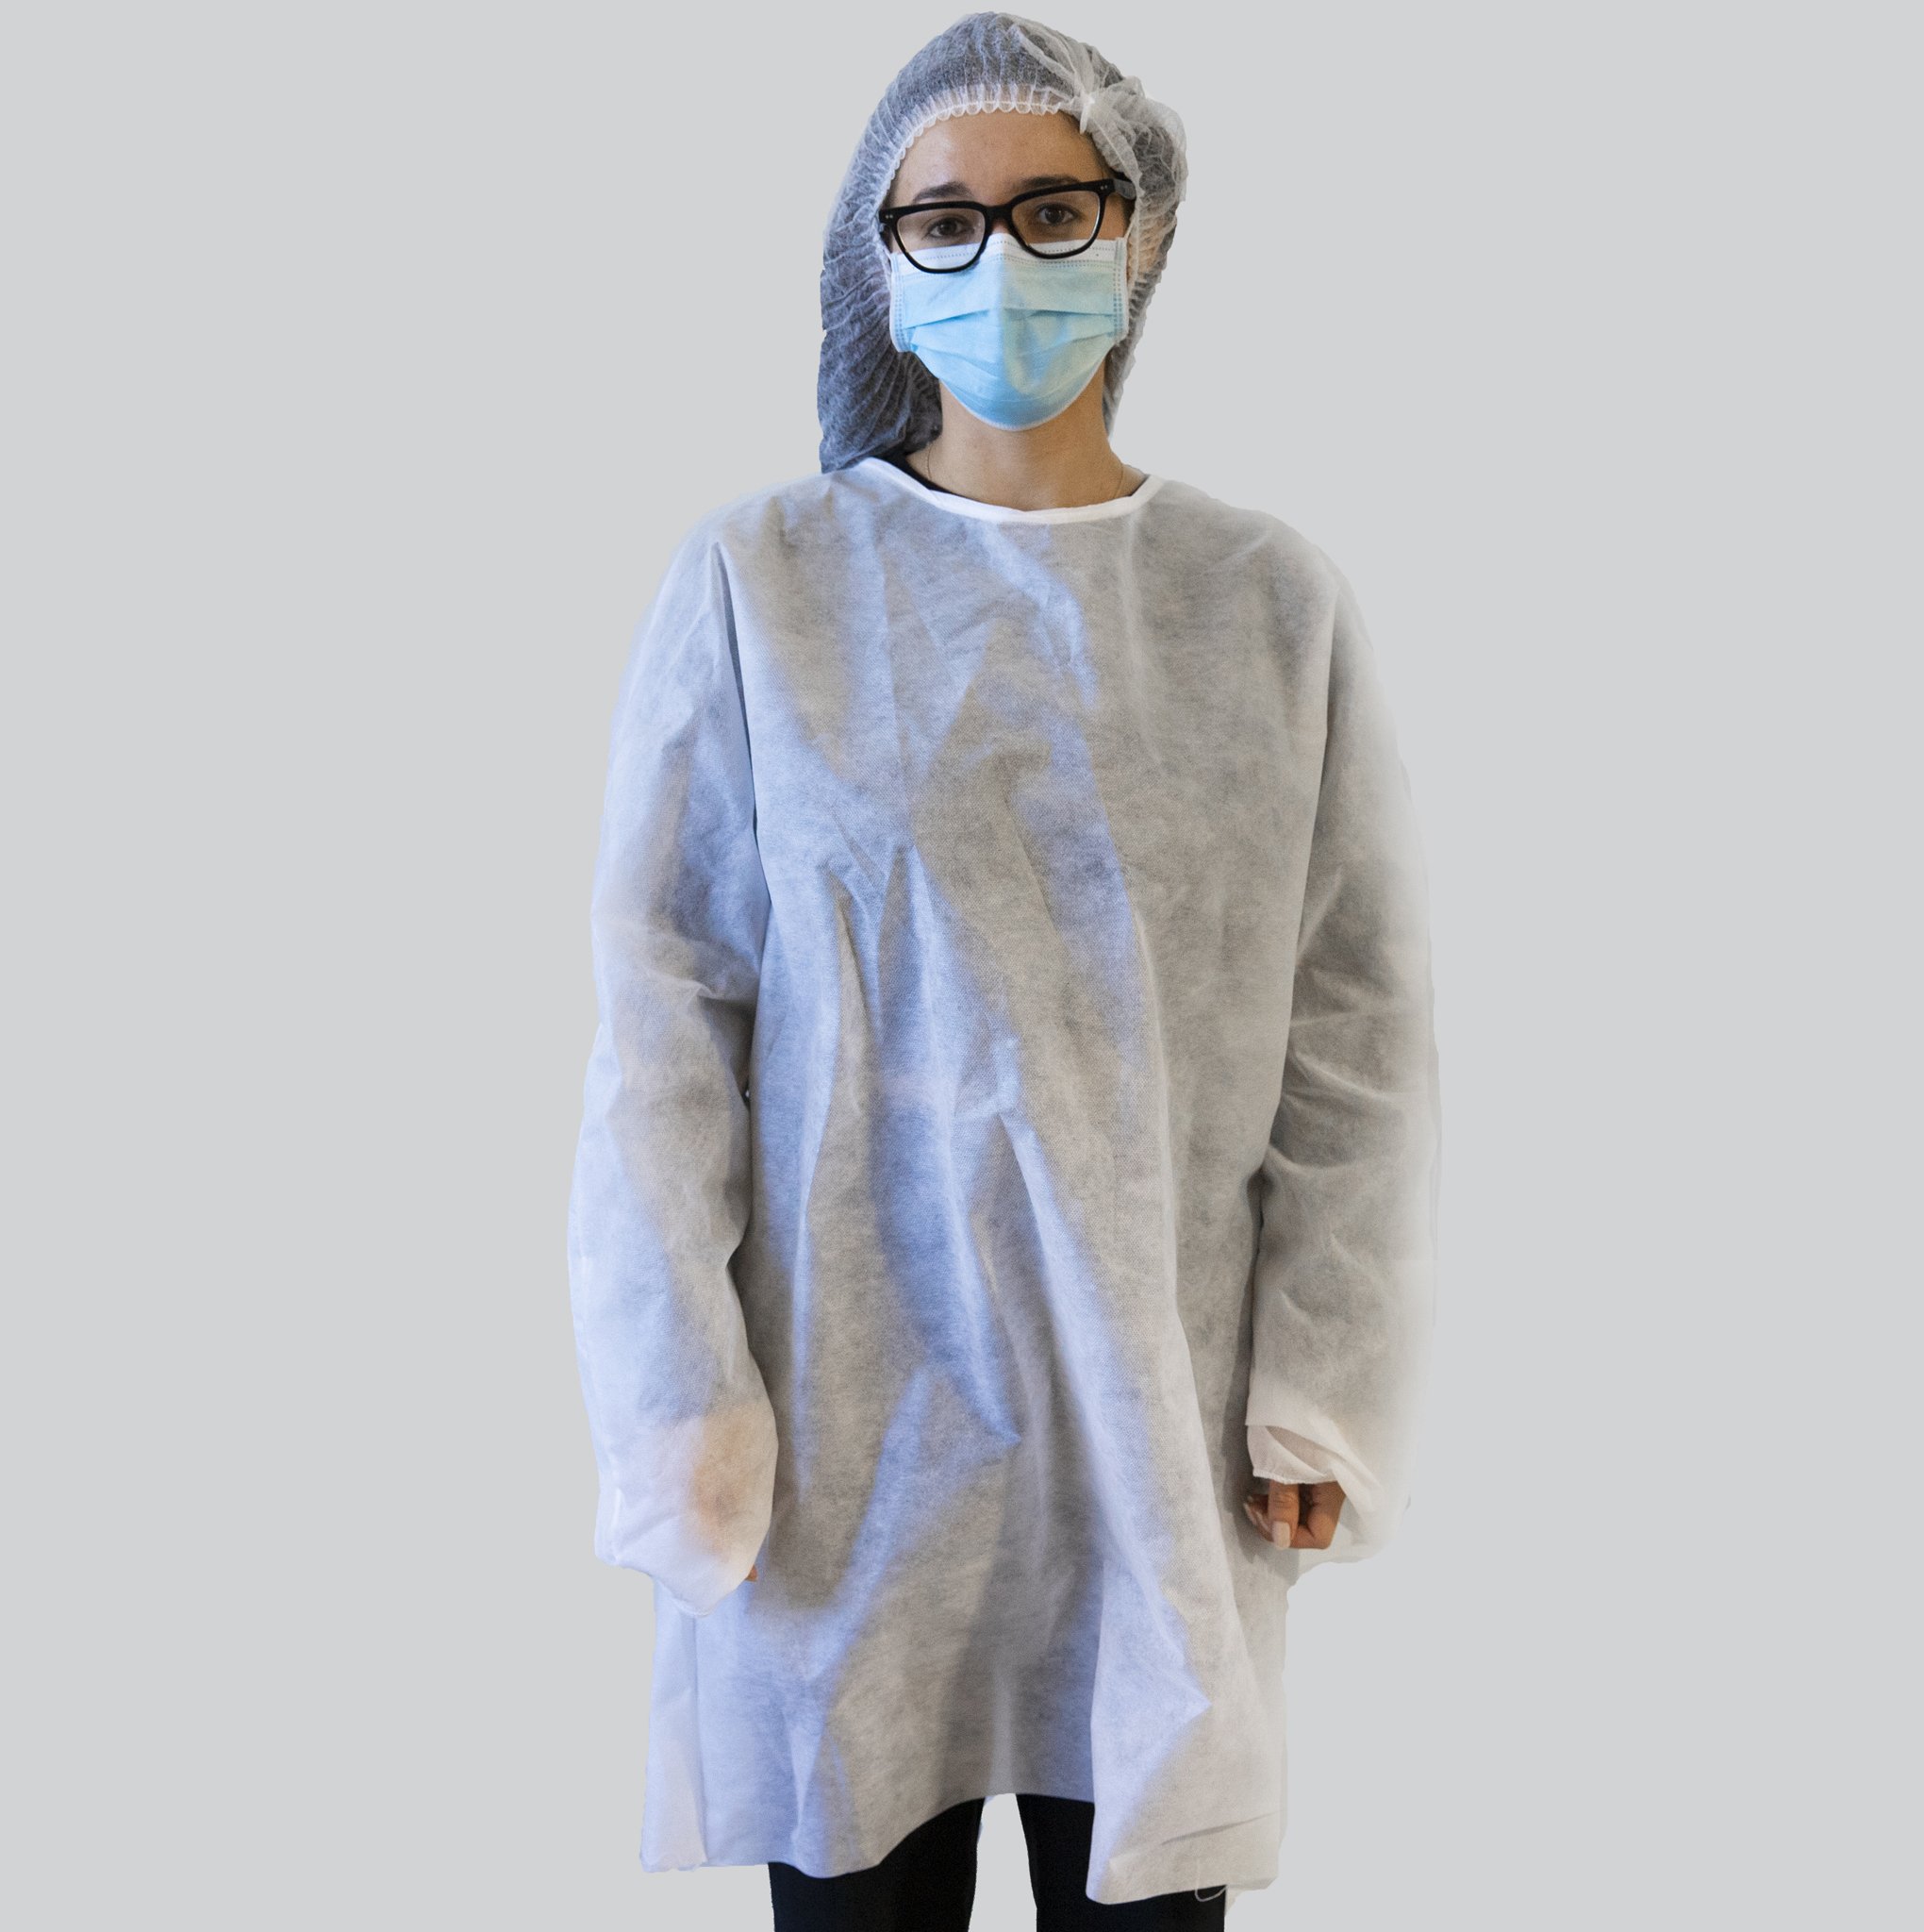 PPE Isolation Gown - Commercial Workwear | Flame Resistant Workwear